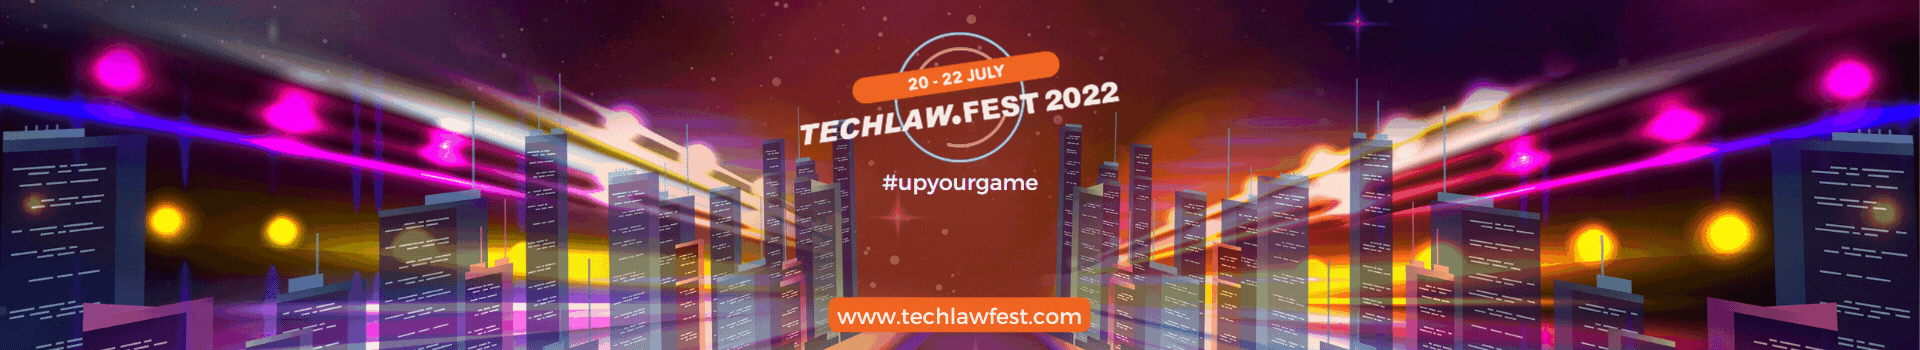 TechLaw Fest 2022 SUSS